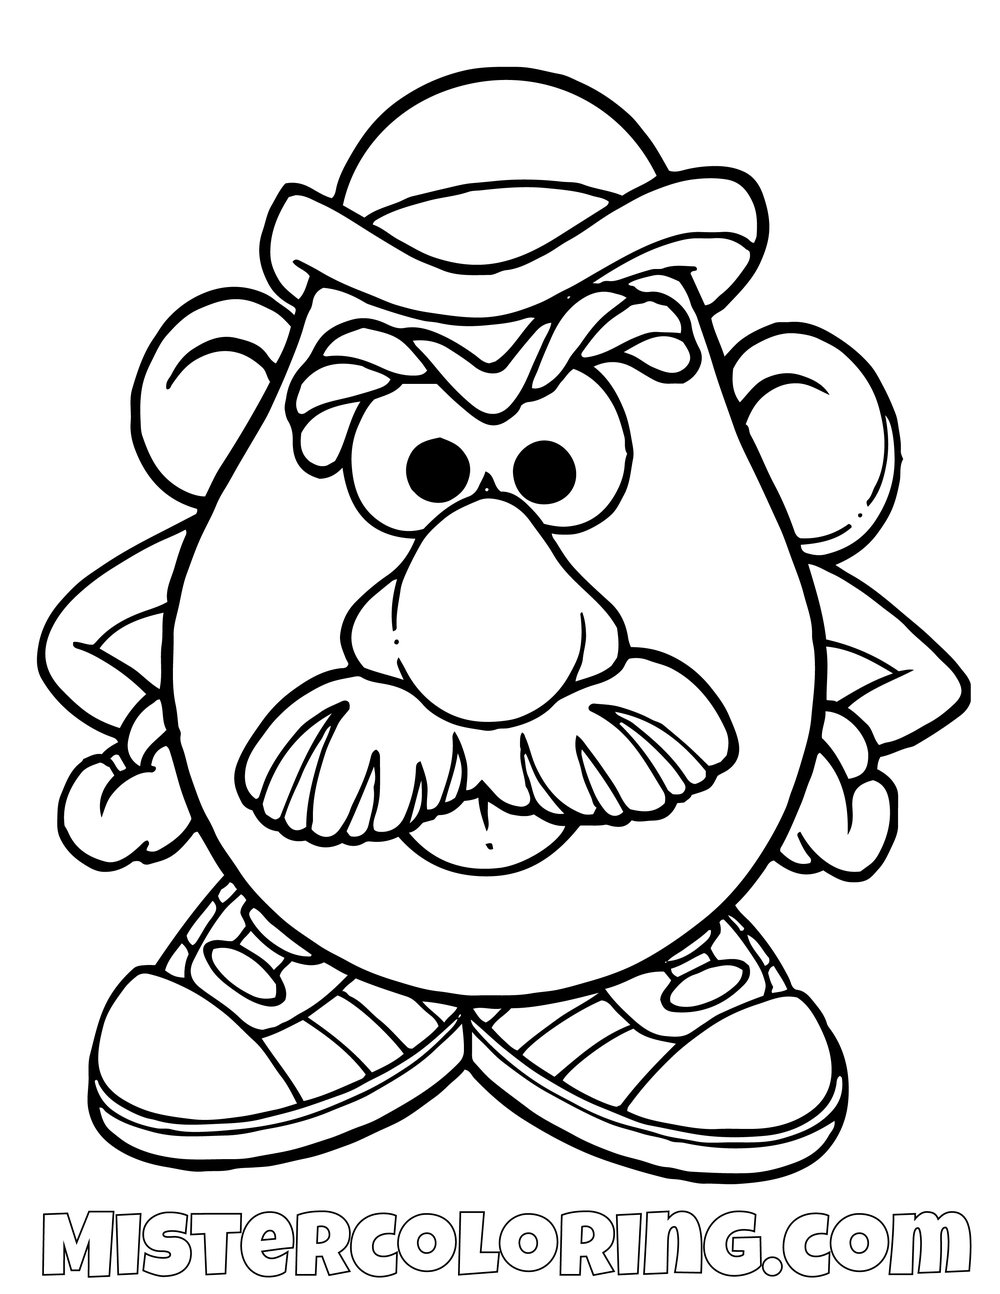 Potato Coloring Page Toy Story Coloring Page For Kids Mister Coloring